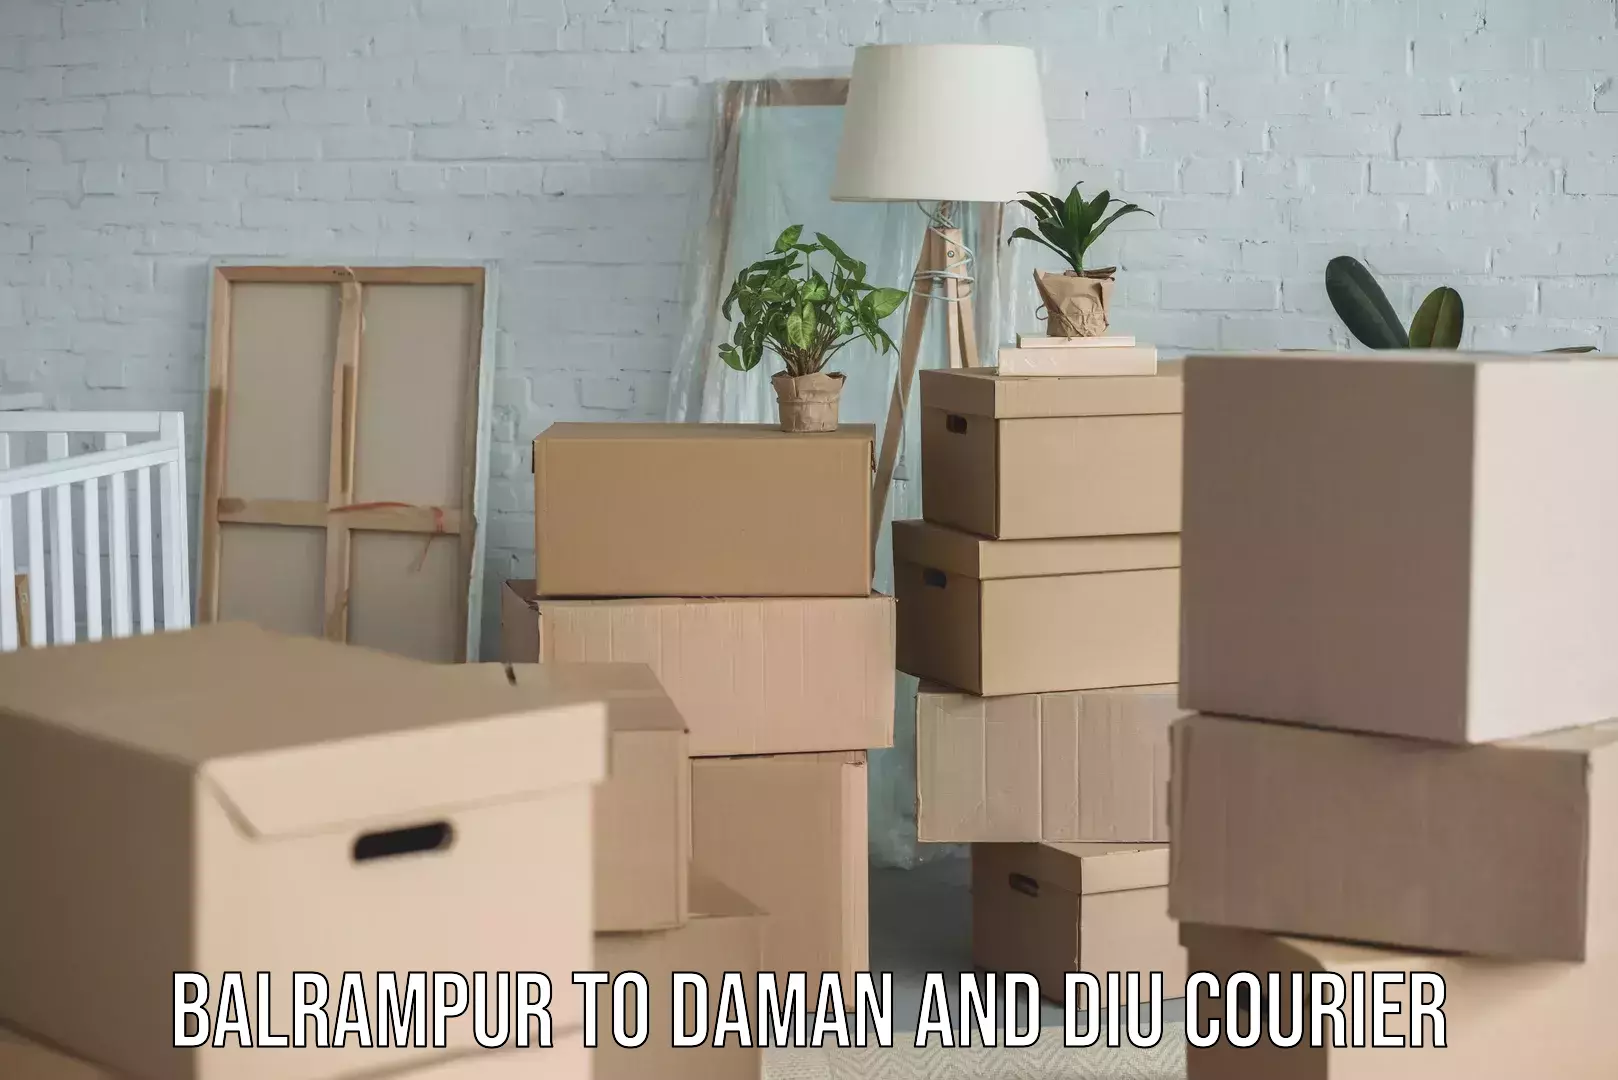 Courier service comparison Balrampur to Daman and Diu